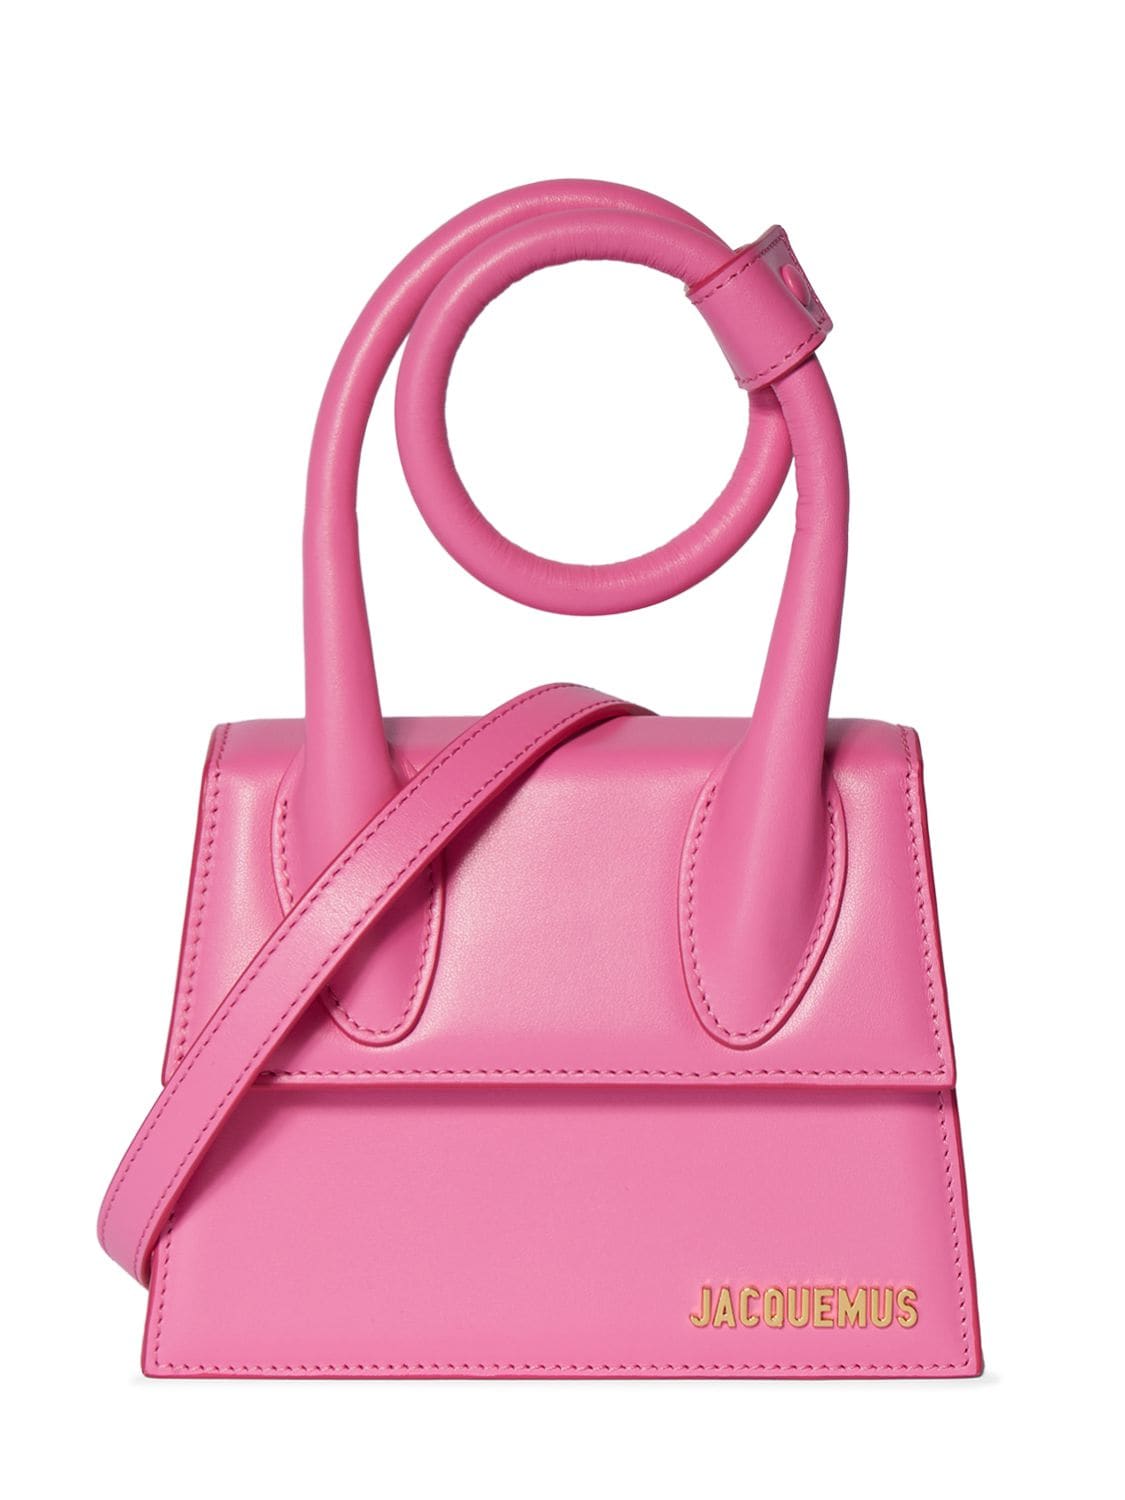 Jacquemus Le Chiquito Noeud Leather Tote Bag in Pink